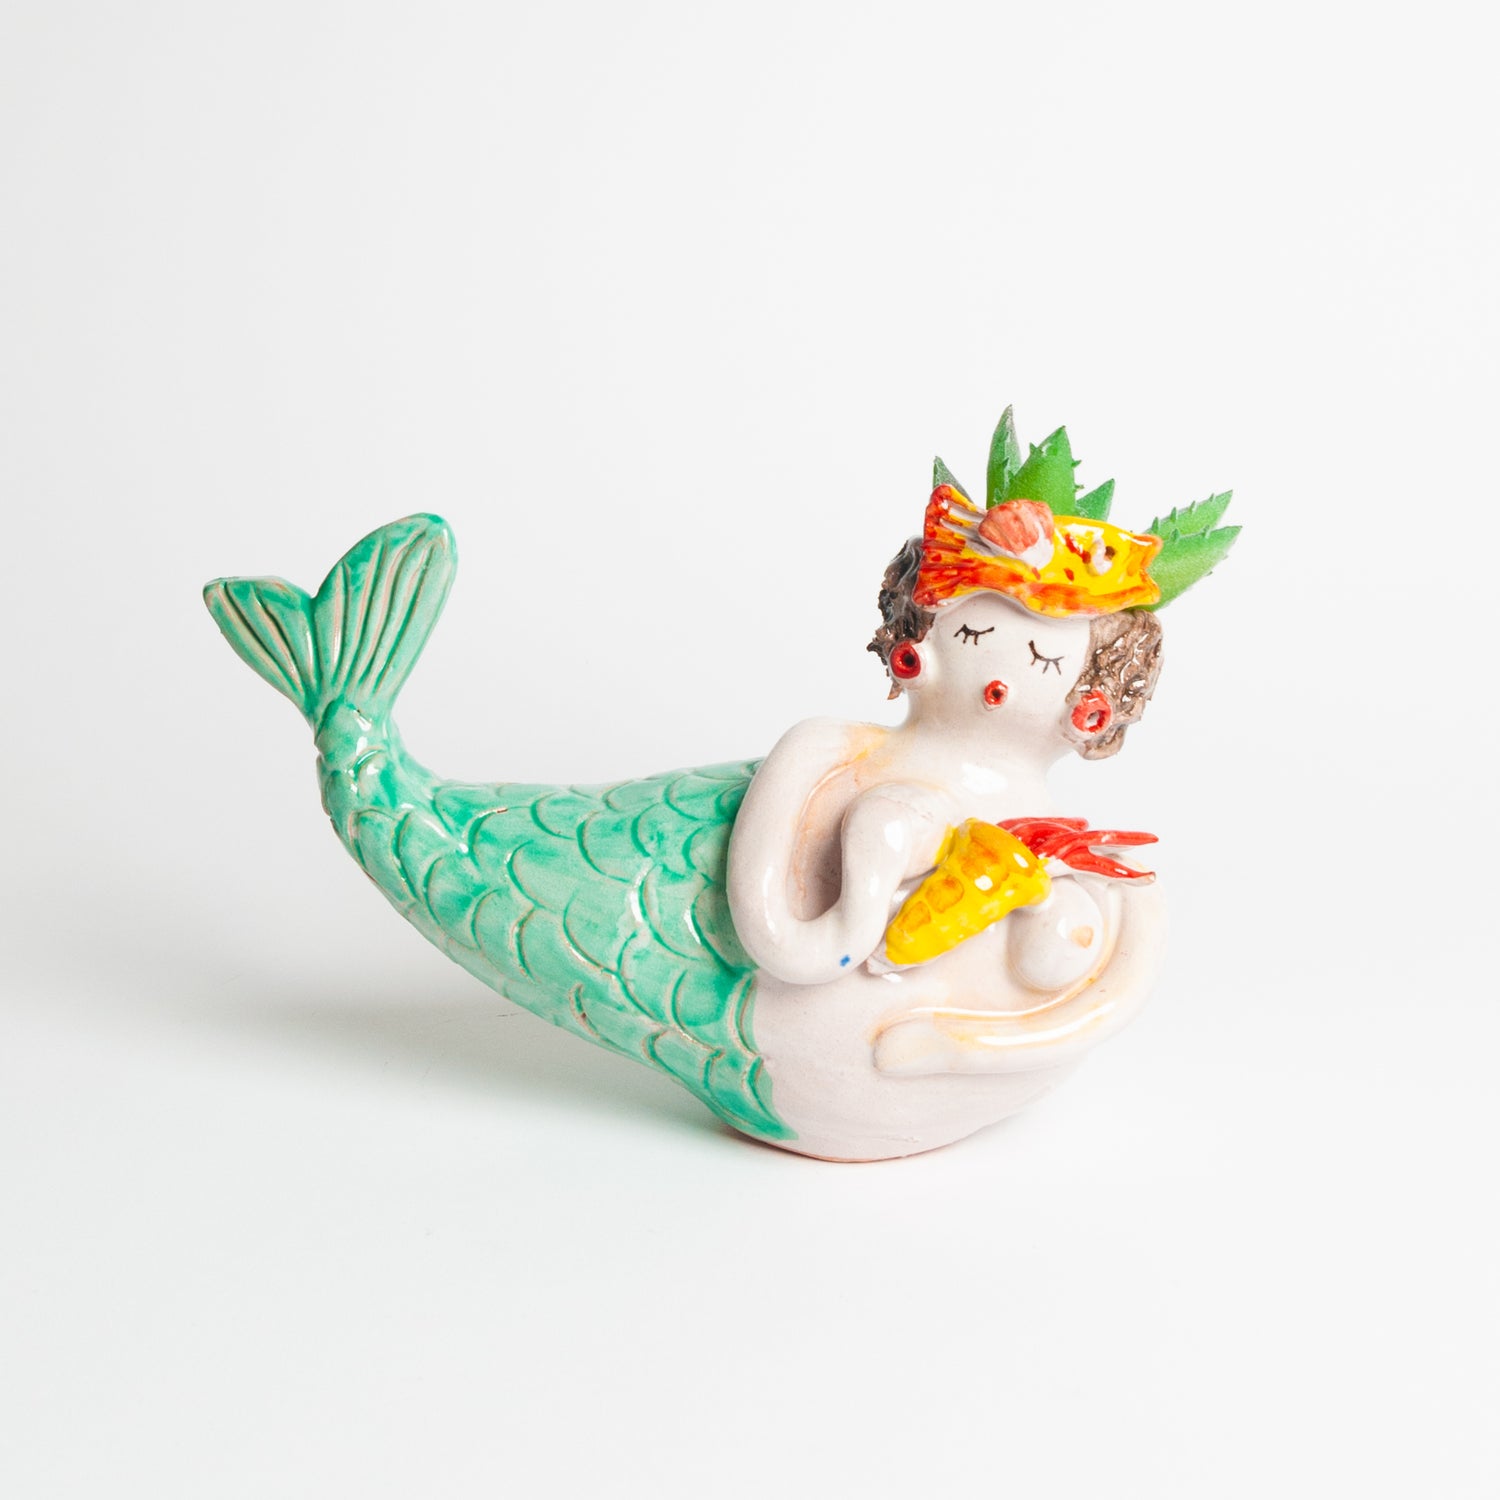 Positano dolls and mermaids collection